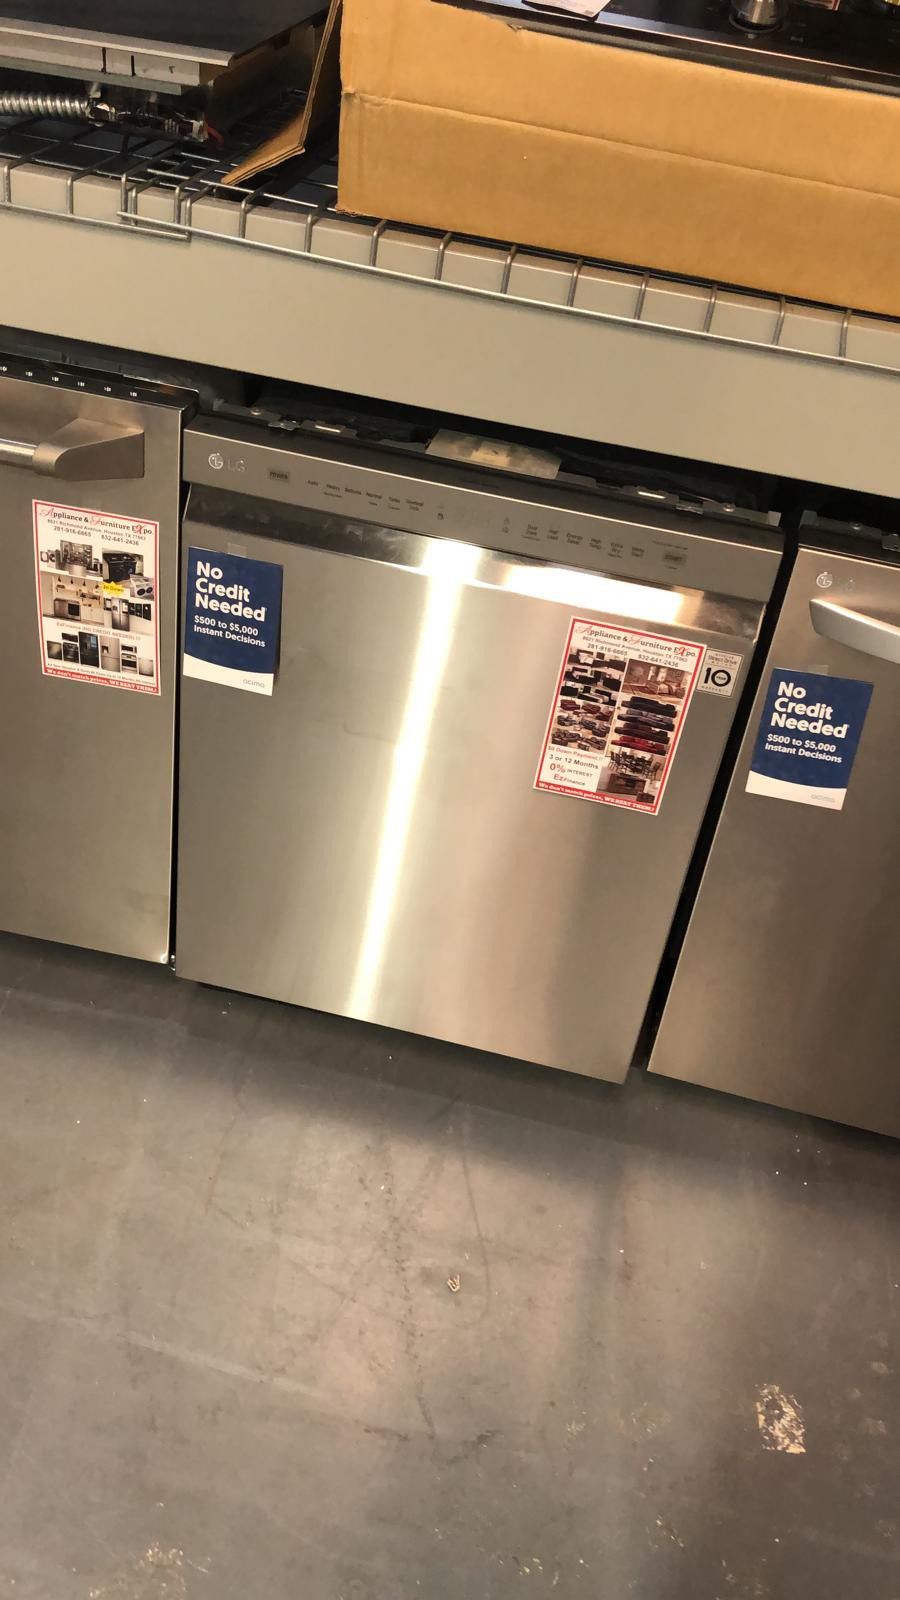 New LG 24" Full Console Built-in Dishwasher with 15 Place Setting Capacity, 9 Wash Cycles, Stainless Steel🔥 EzFinancing 39$ Down